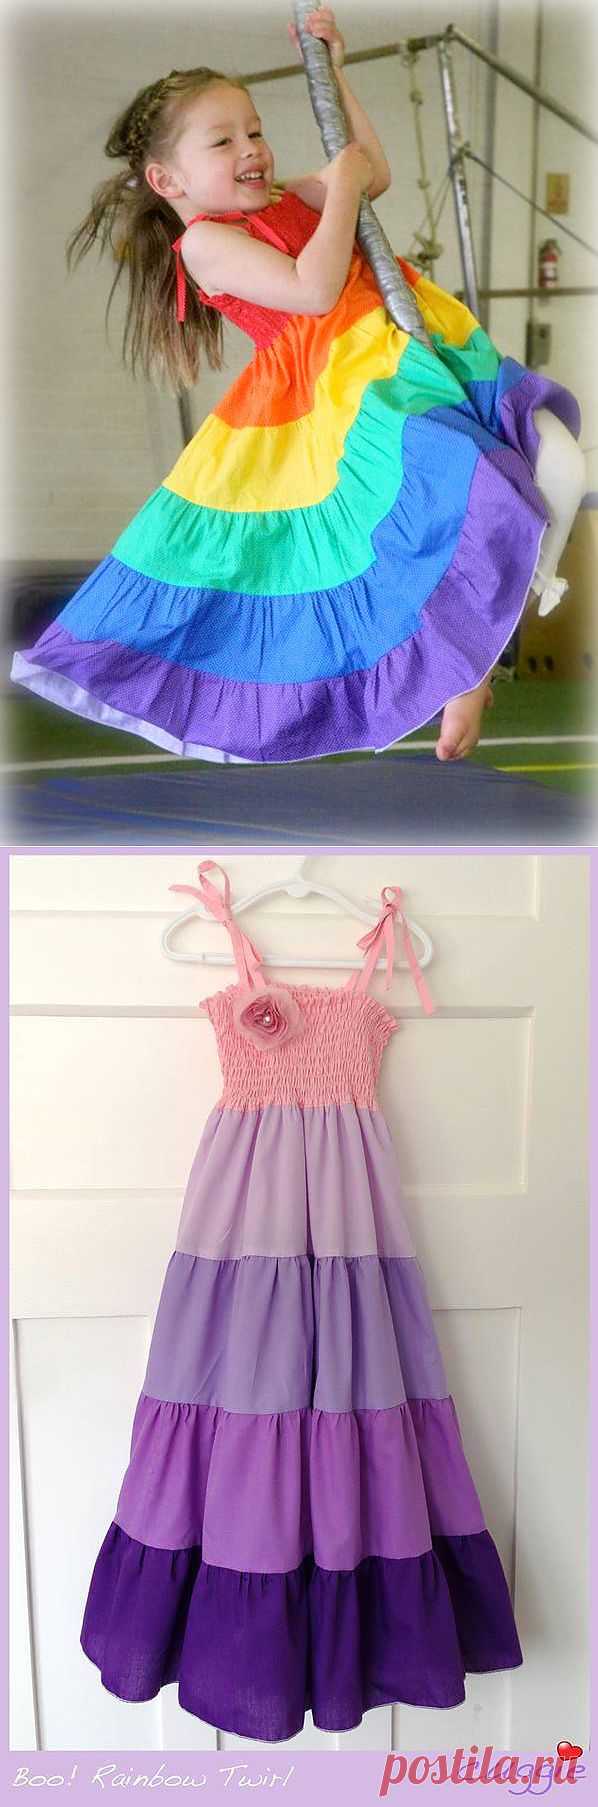 DESIGN YOUR OWN RAINBOW TWIRL DRESS BOO! DESIGNS PDF ePATTERN Design your own boo twirl dress for girls [] - $12.00 : PatternsOnly, Patterns for Quilting, Patchwork, Handbags, Soft Toys,Clothing and More